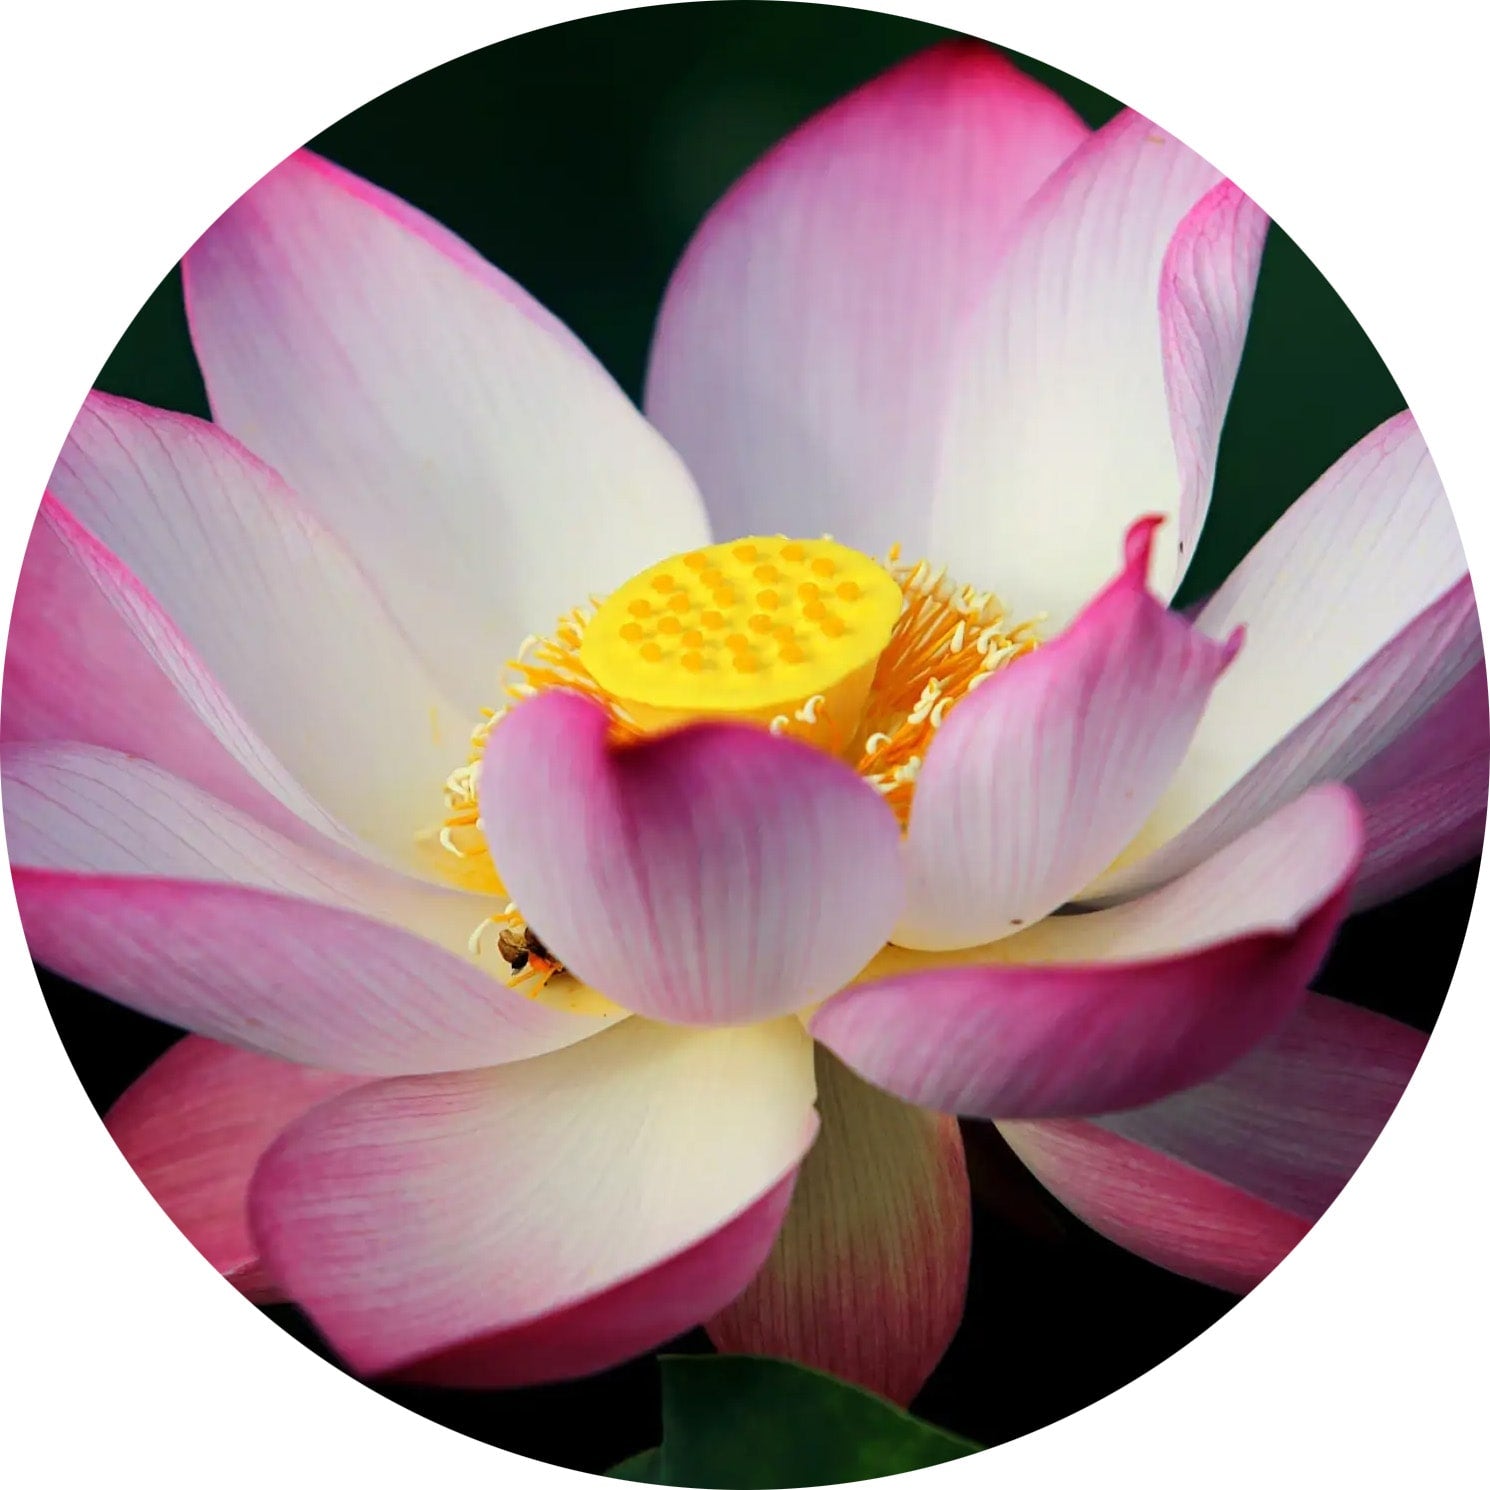 Pink and white Lotus flower with vibrant yellow center